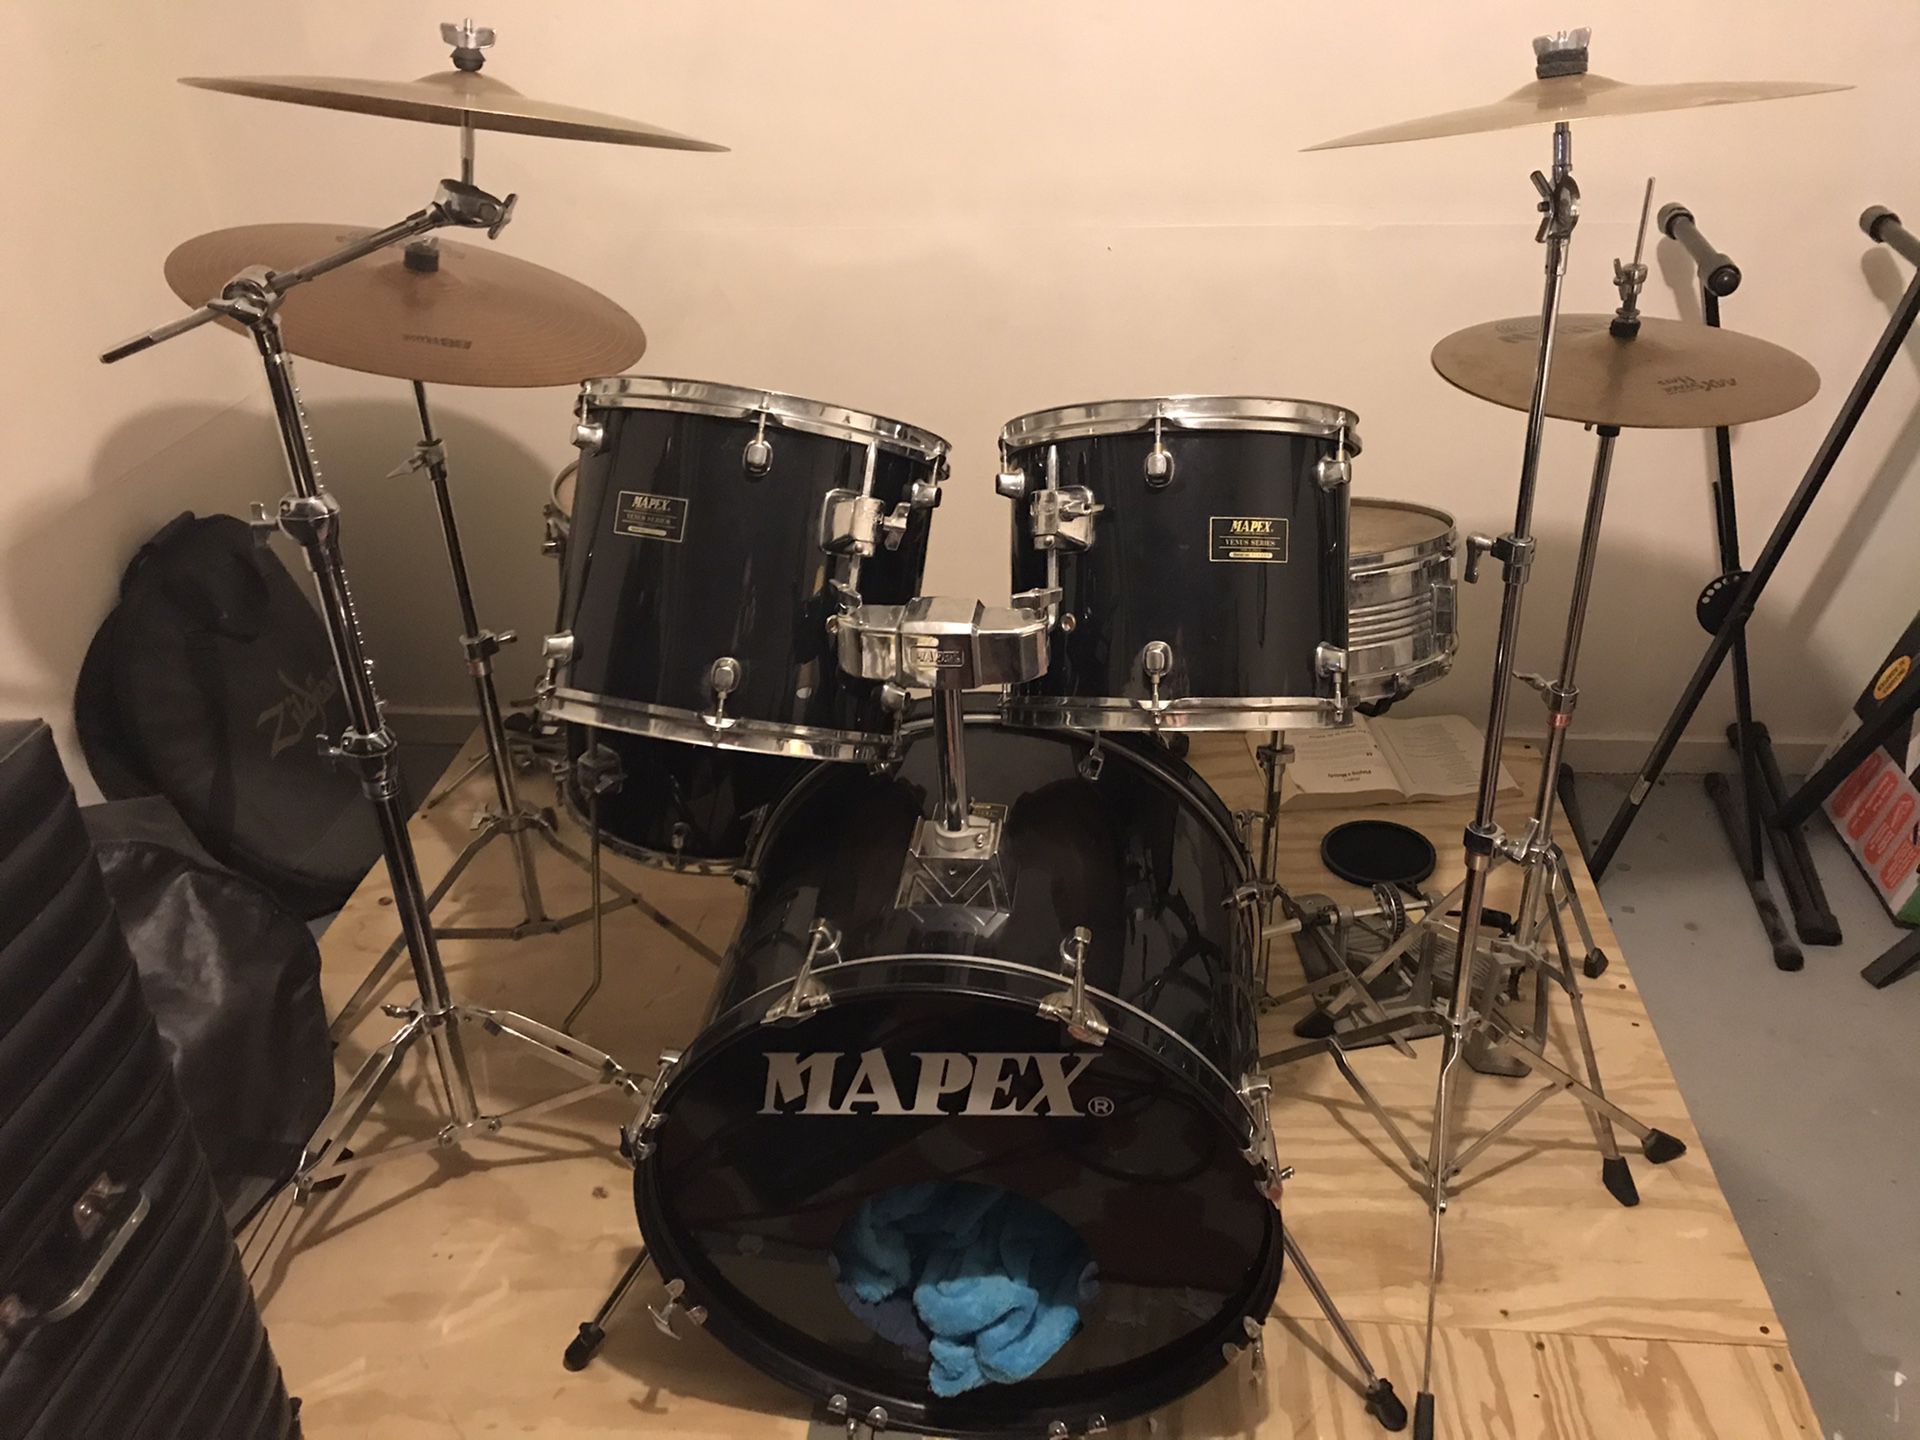 Mapex Venus Series 5 pc kit with all the fixins (hardware, cymbals, carrying cases, etc.) - Negotiable